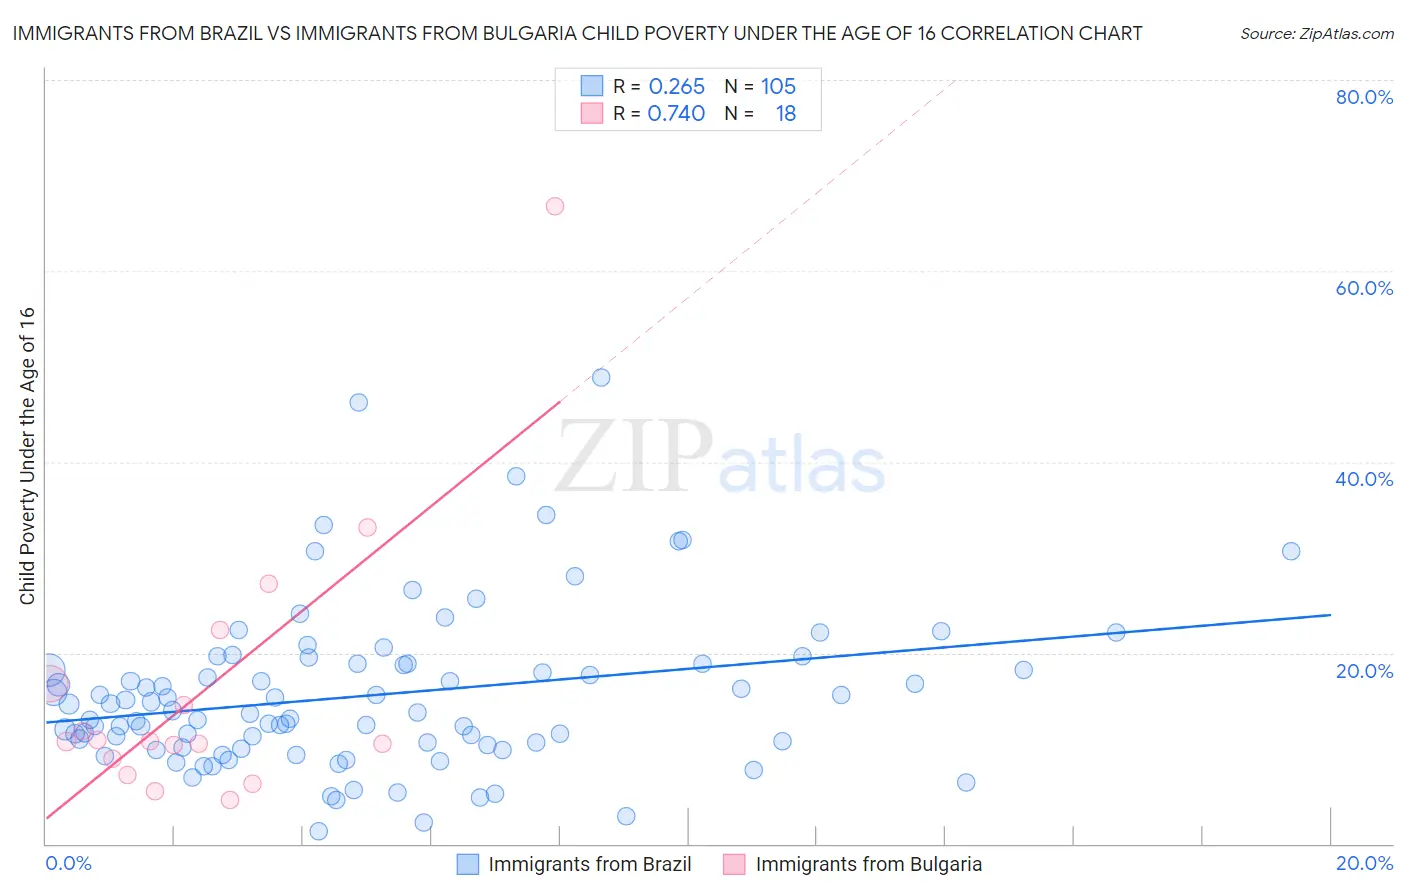 Immigrants from Brazil vs Immigrants from Bulgaria Child Poverty Under the Age of 16